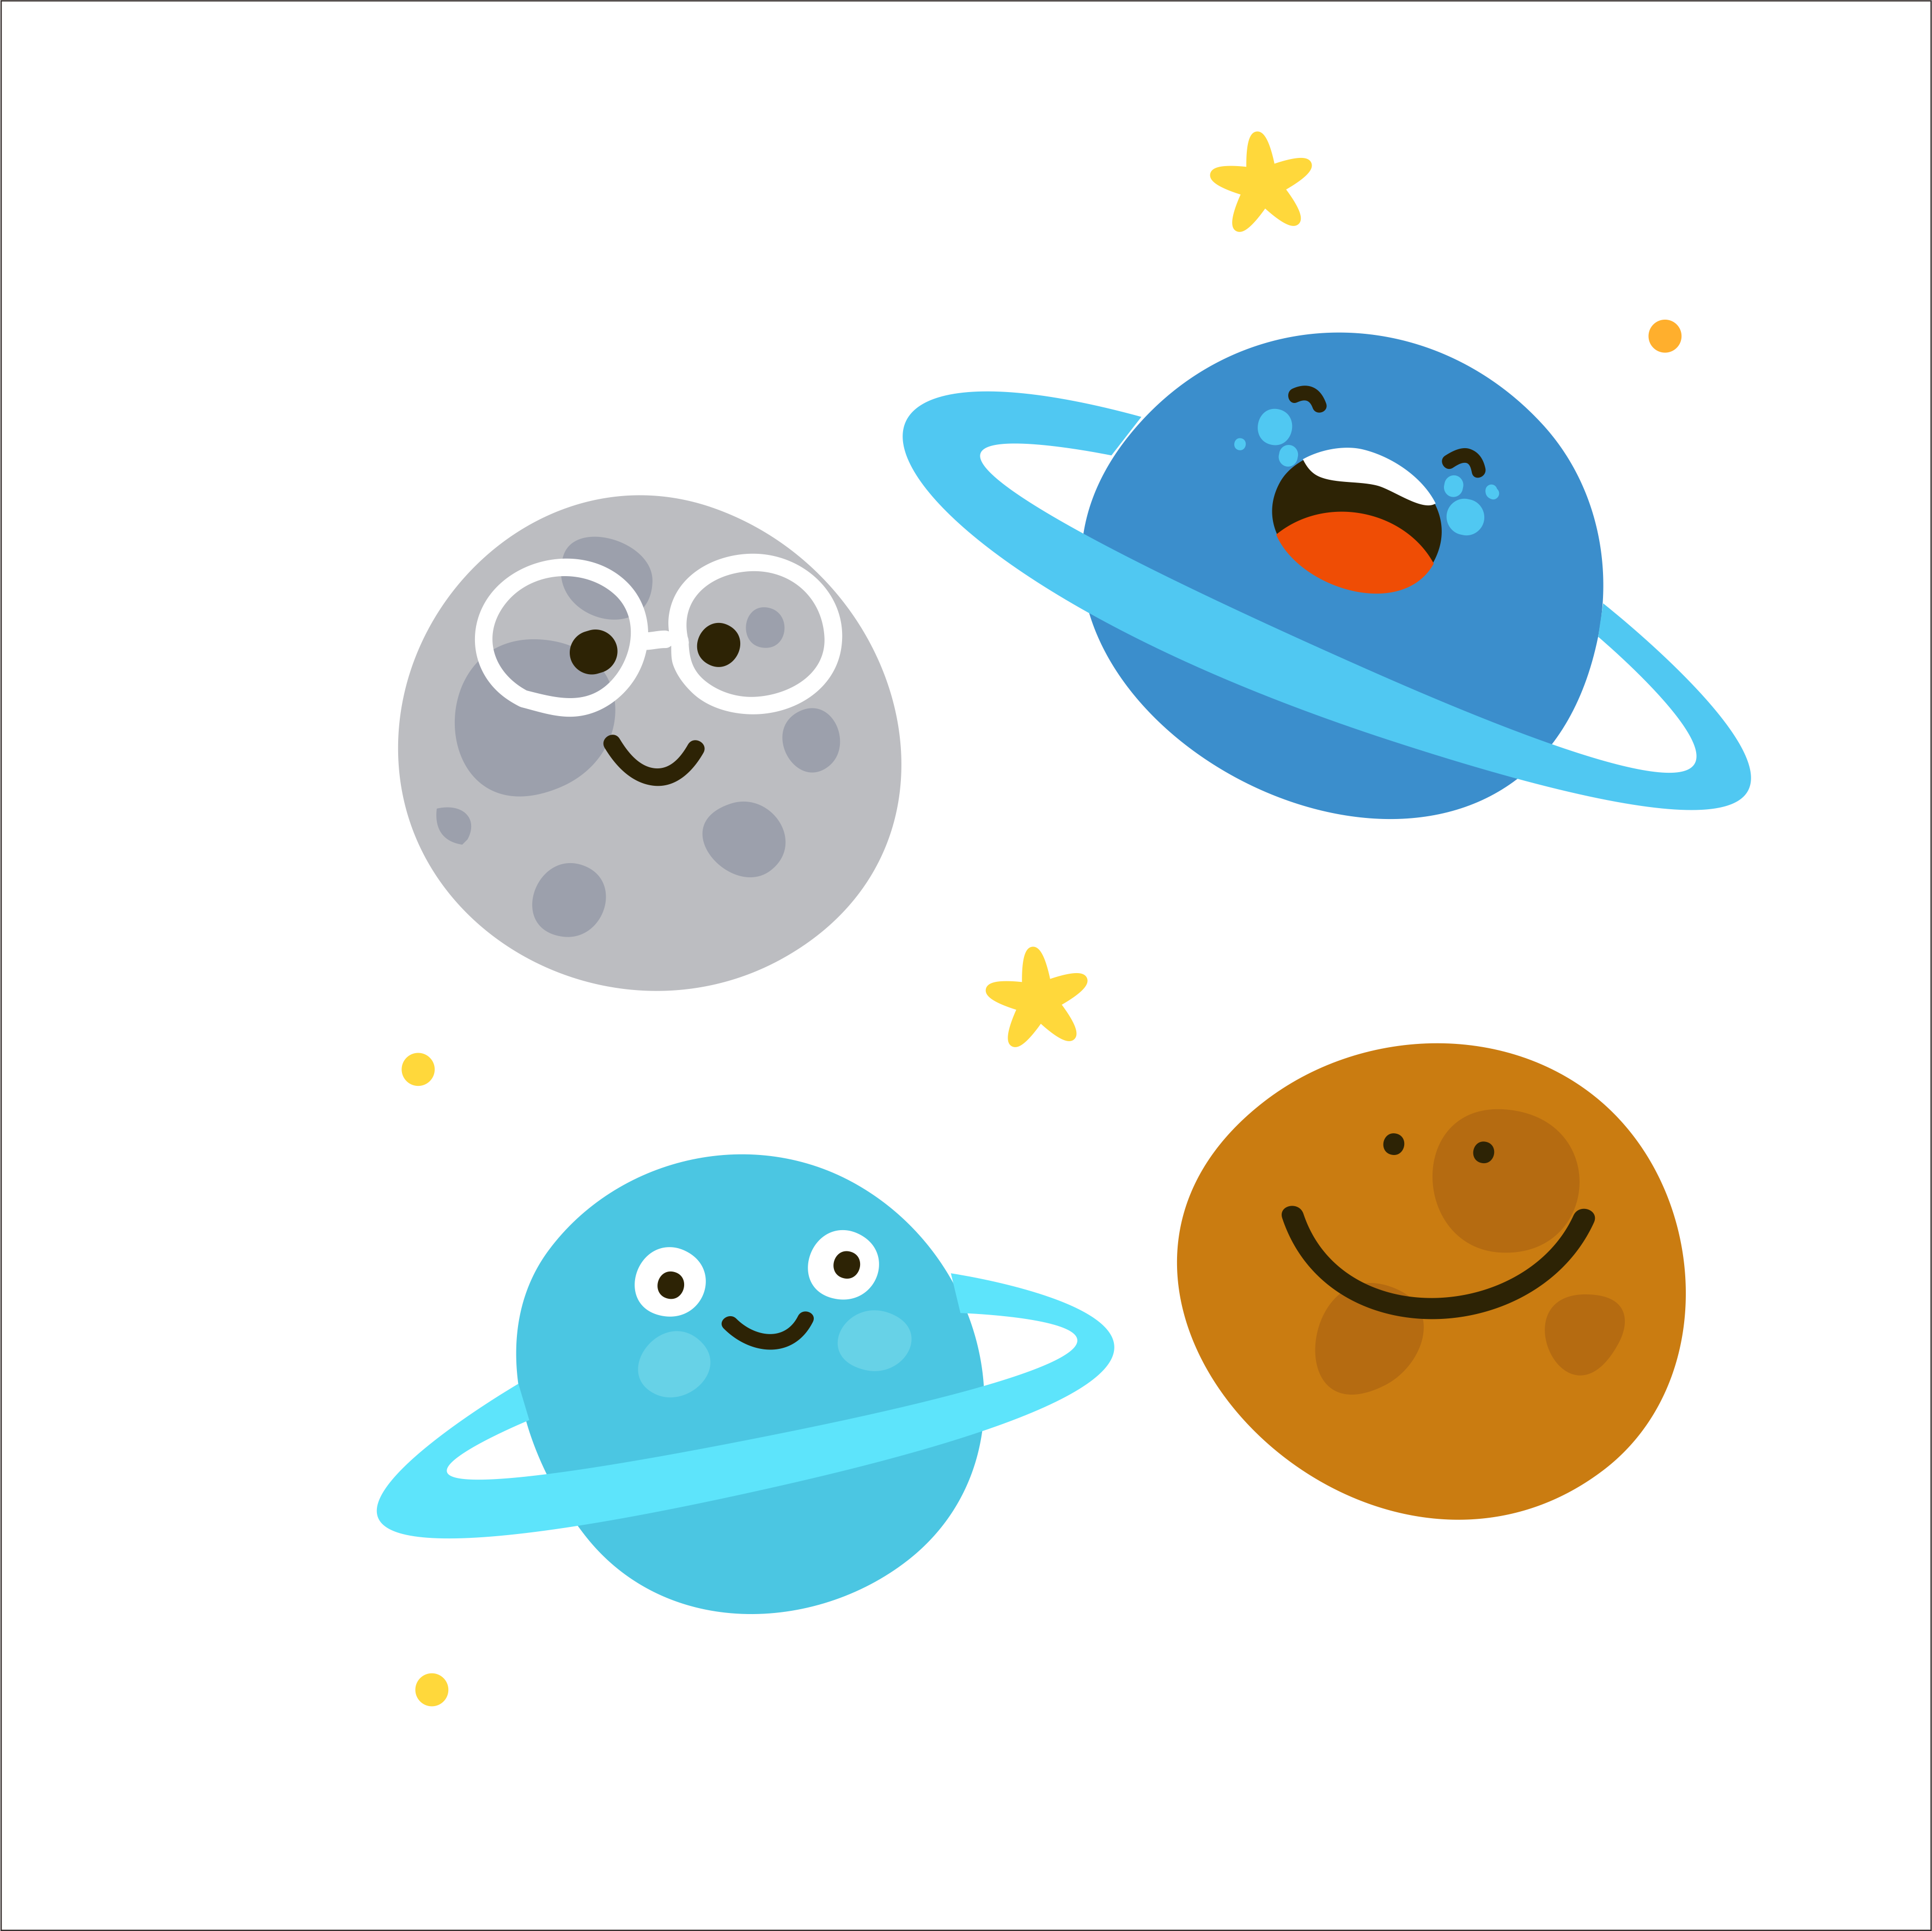 Planet Cartoon Illustration - Icon Png Planet Eart, Find more high quality ...